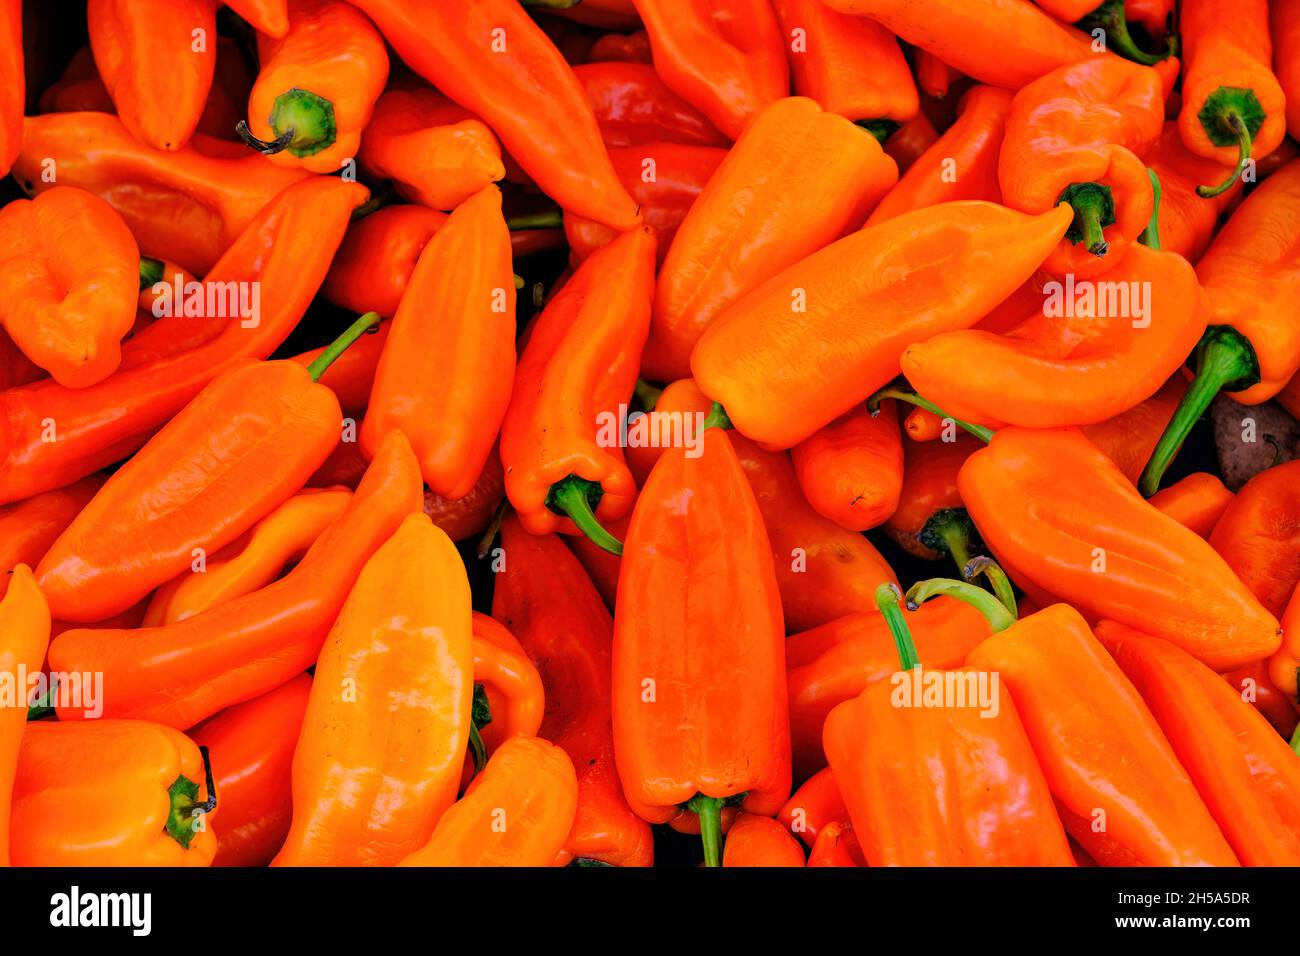 many sweet and spicy orange peppers on the market Stock Photo